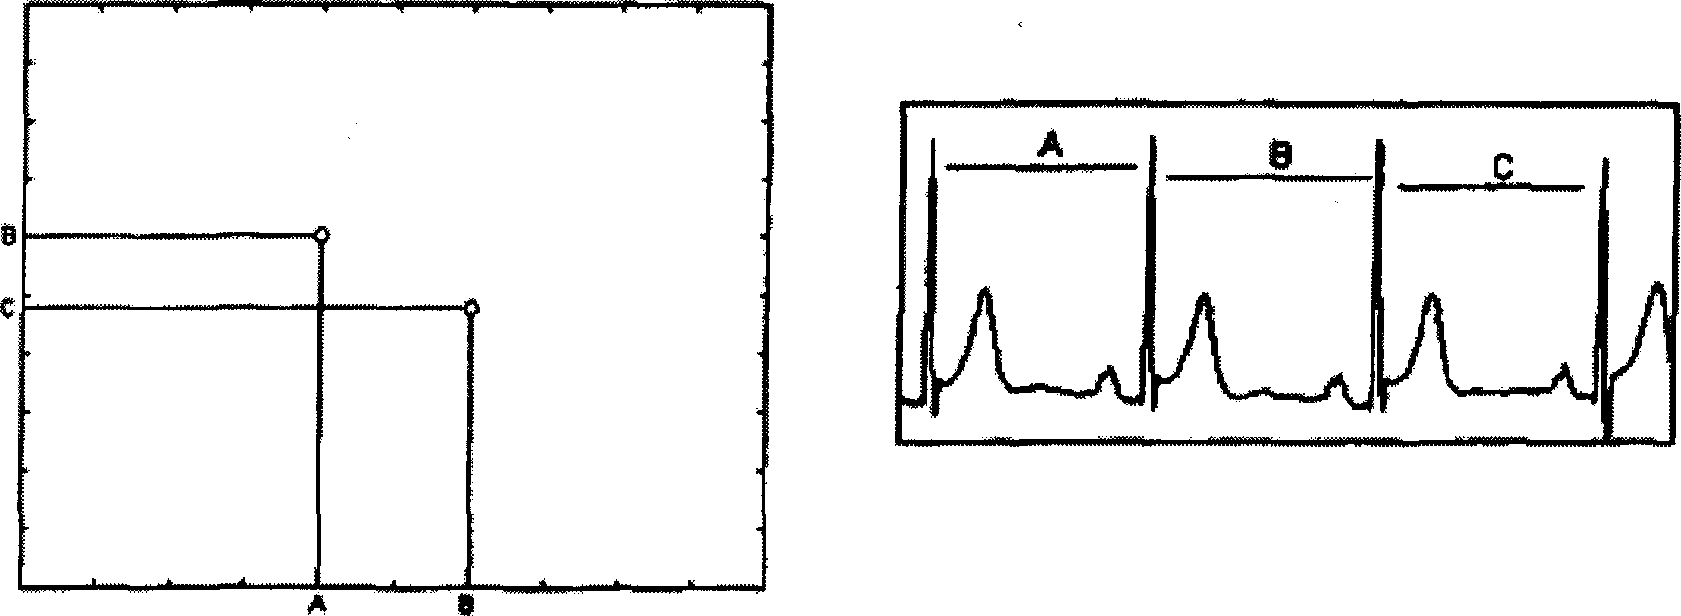 Dynamic characteristic analysis method of real-time tendency of heart state